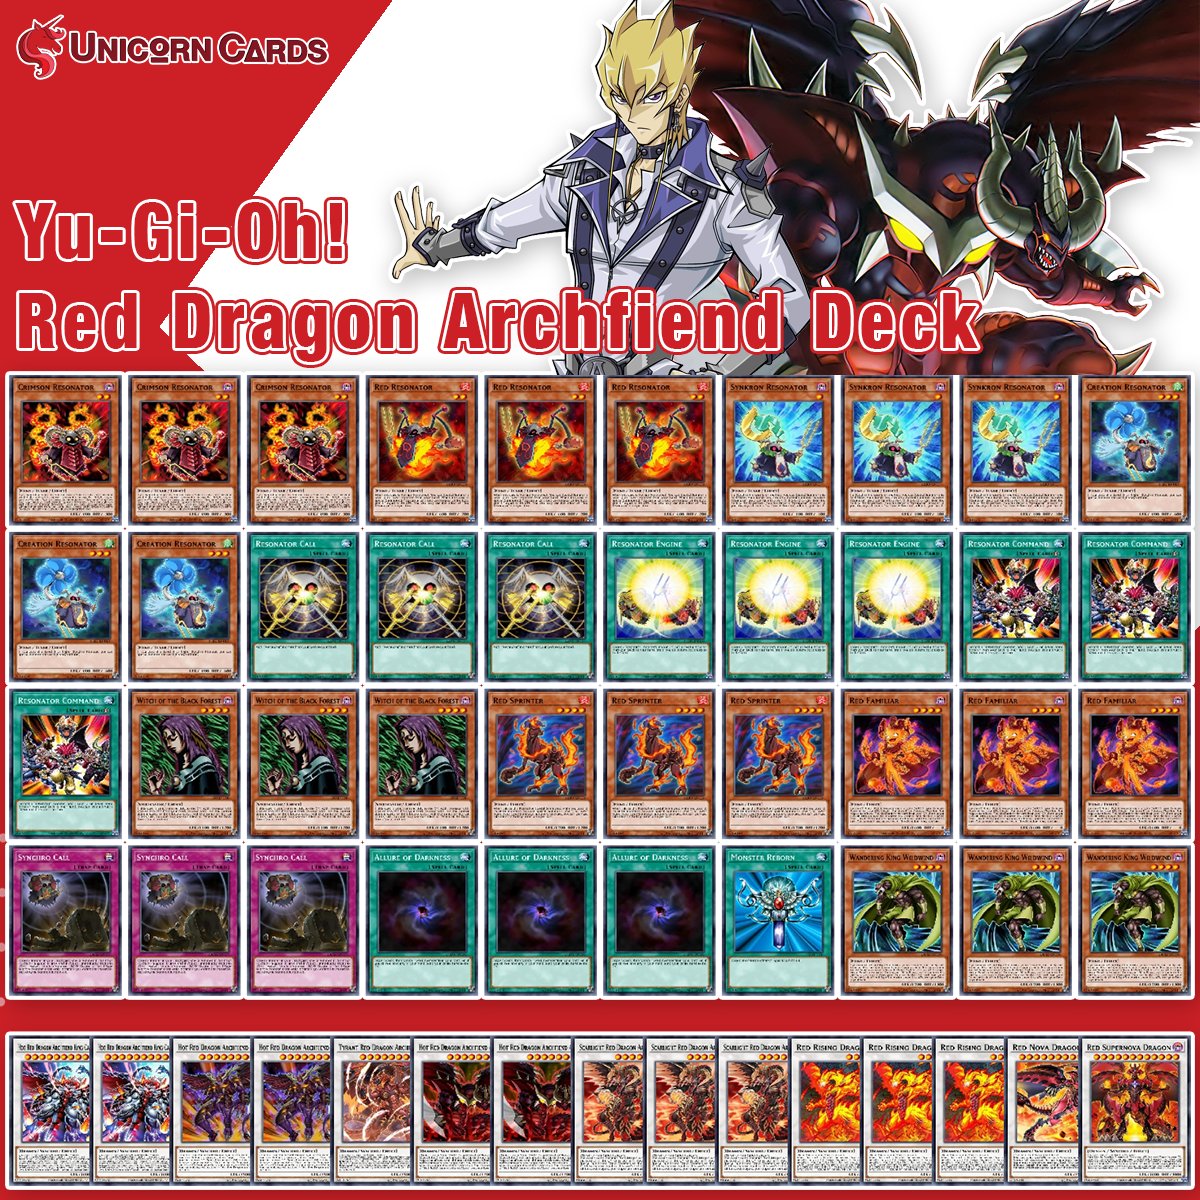 Unicorn Cards on Twitter: "Red Dragon Archfiend Deck: Do you think you improve this deck❓ Please share your thoughts and opinions on this deck❗ https://t.co/4uWUs9qau5 #YuGiOh #yugiohcards #yugiohcommunity #yugiohcollection #yugiohcollector #遊戯王